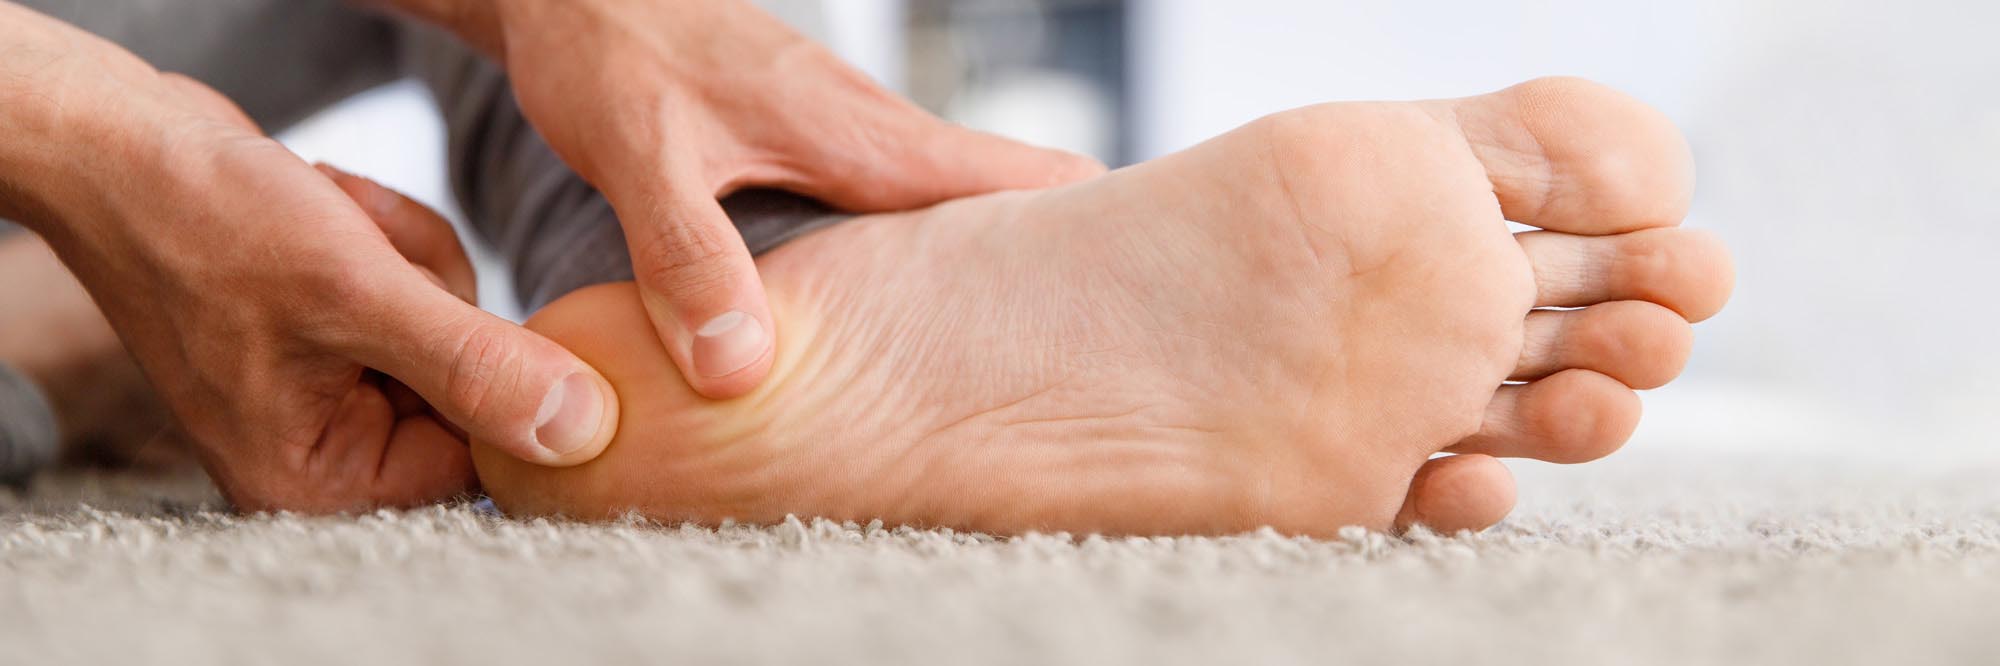 Is It Normal To Wake Up With Sore Feet? – My FootDr